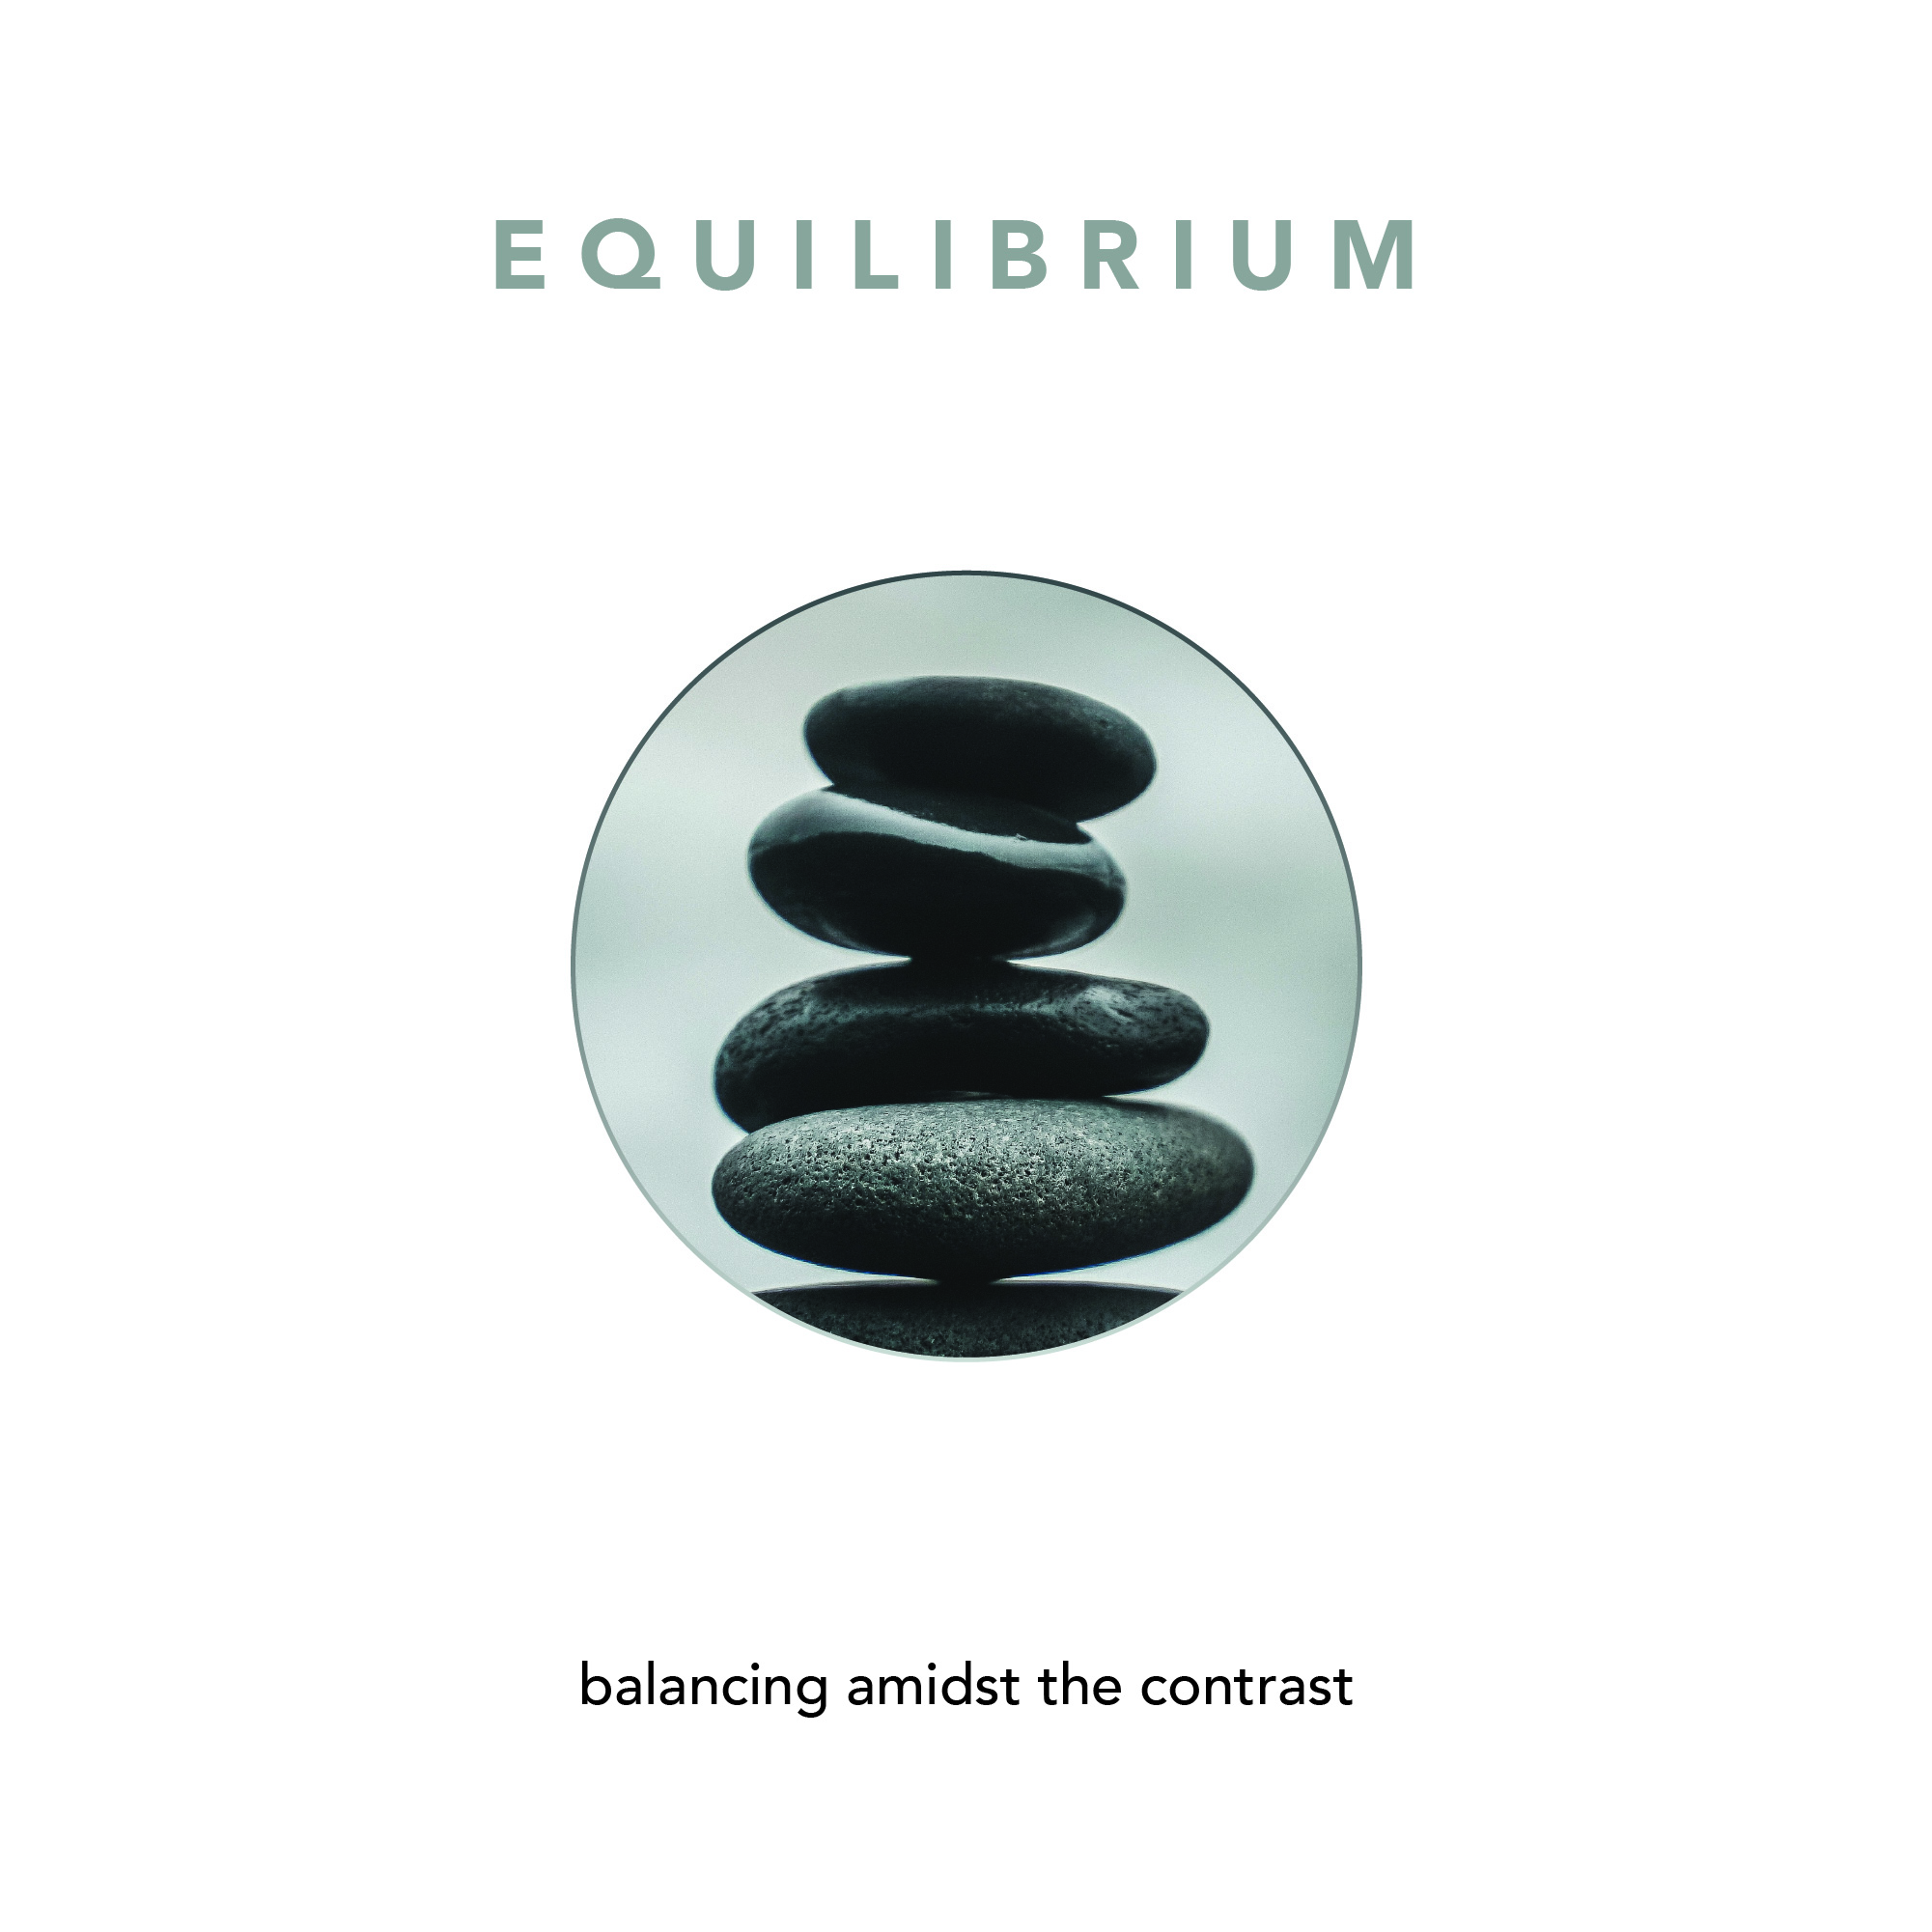 ⚖️ EQUILIBRIUM - accepting the contrast and celebrating periods of balance